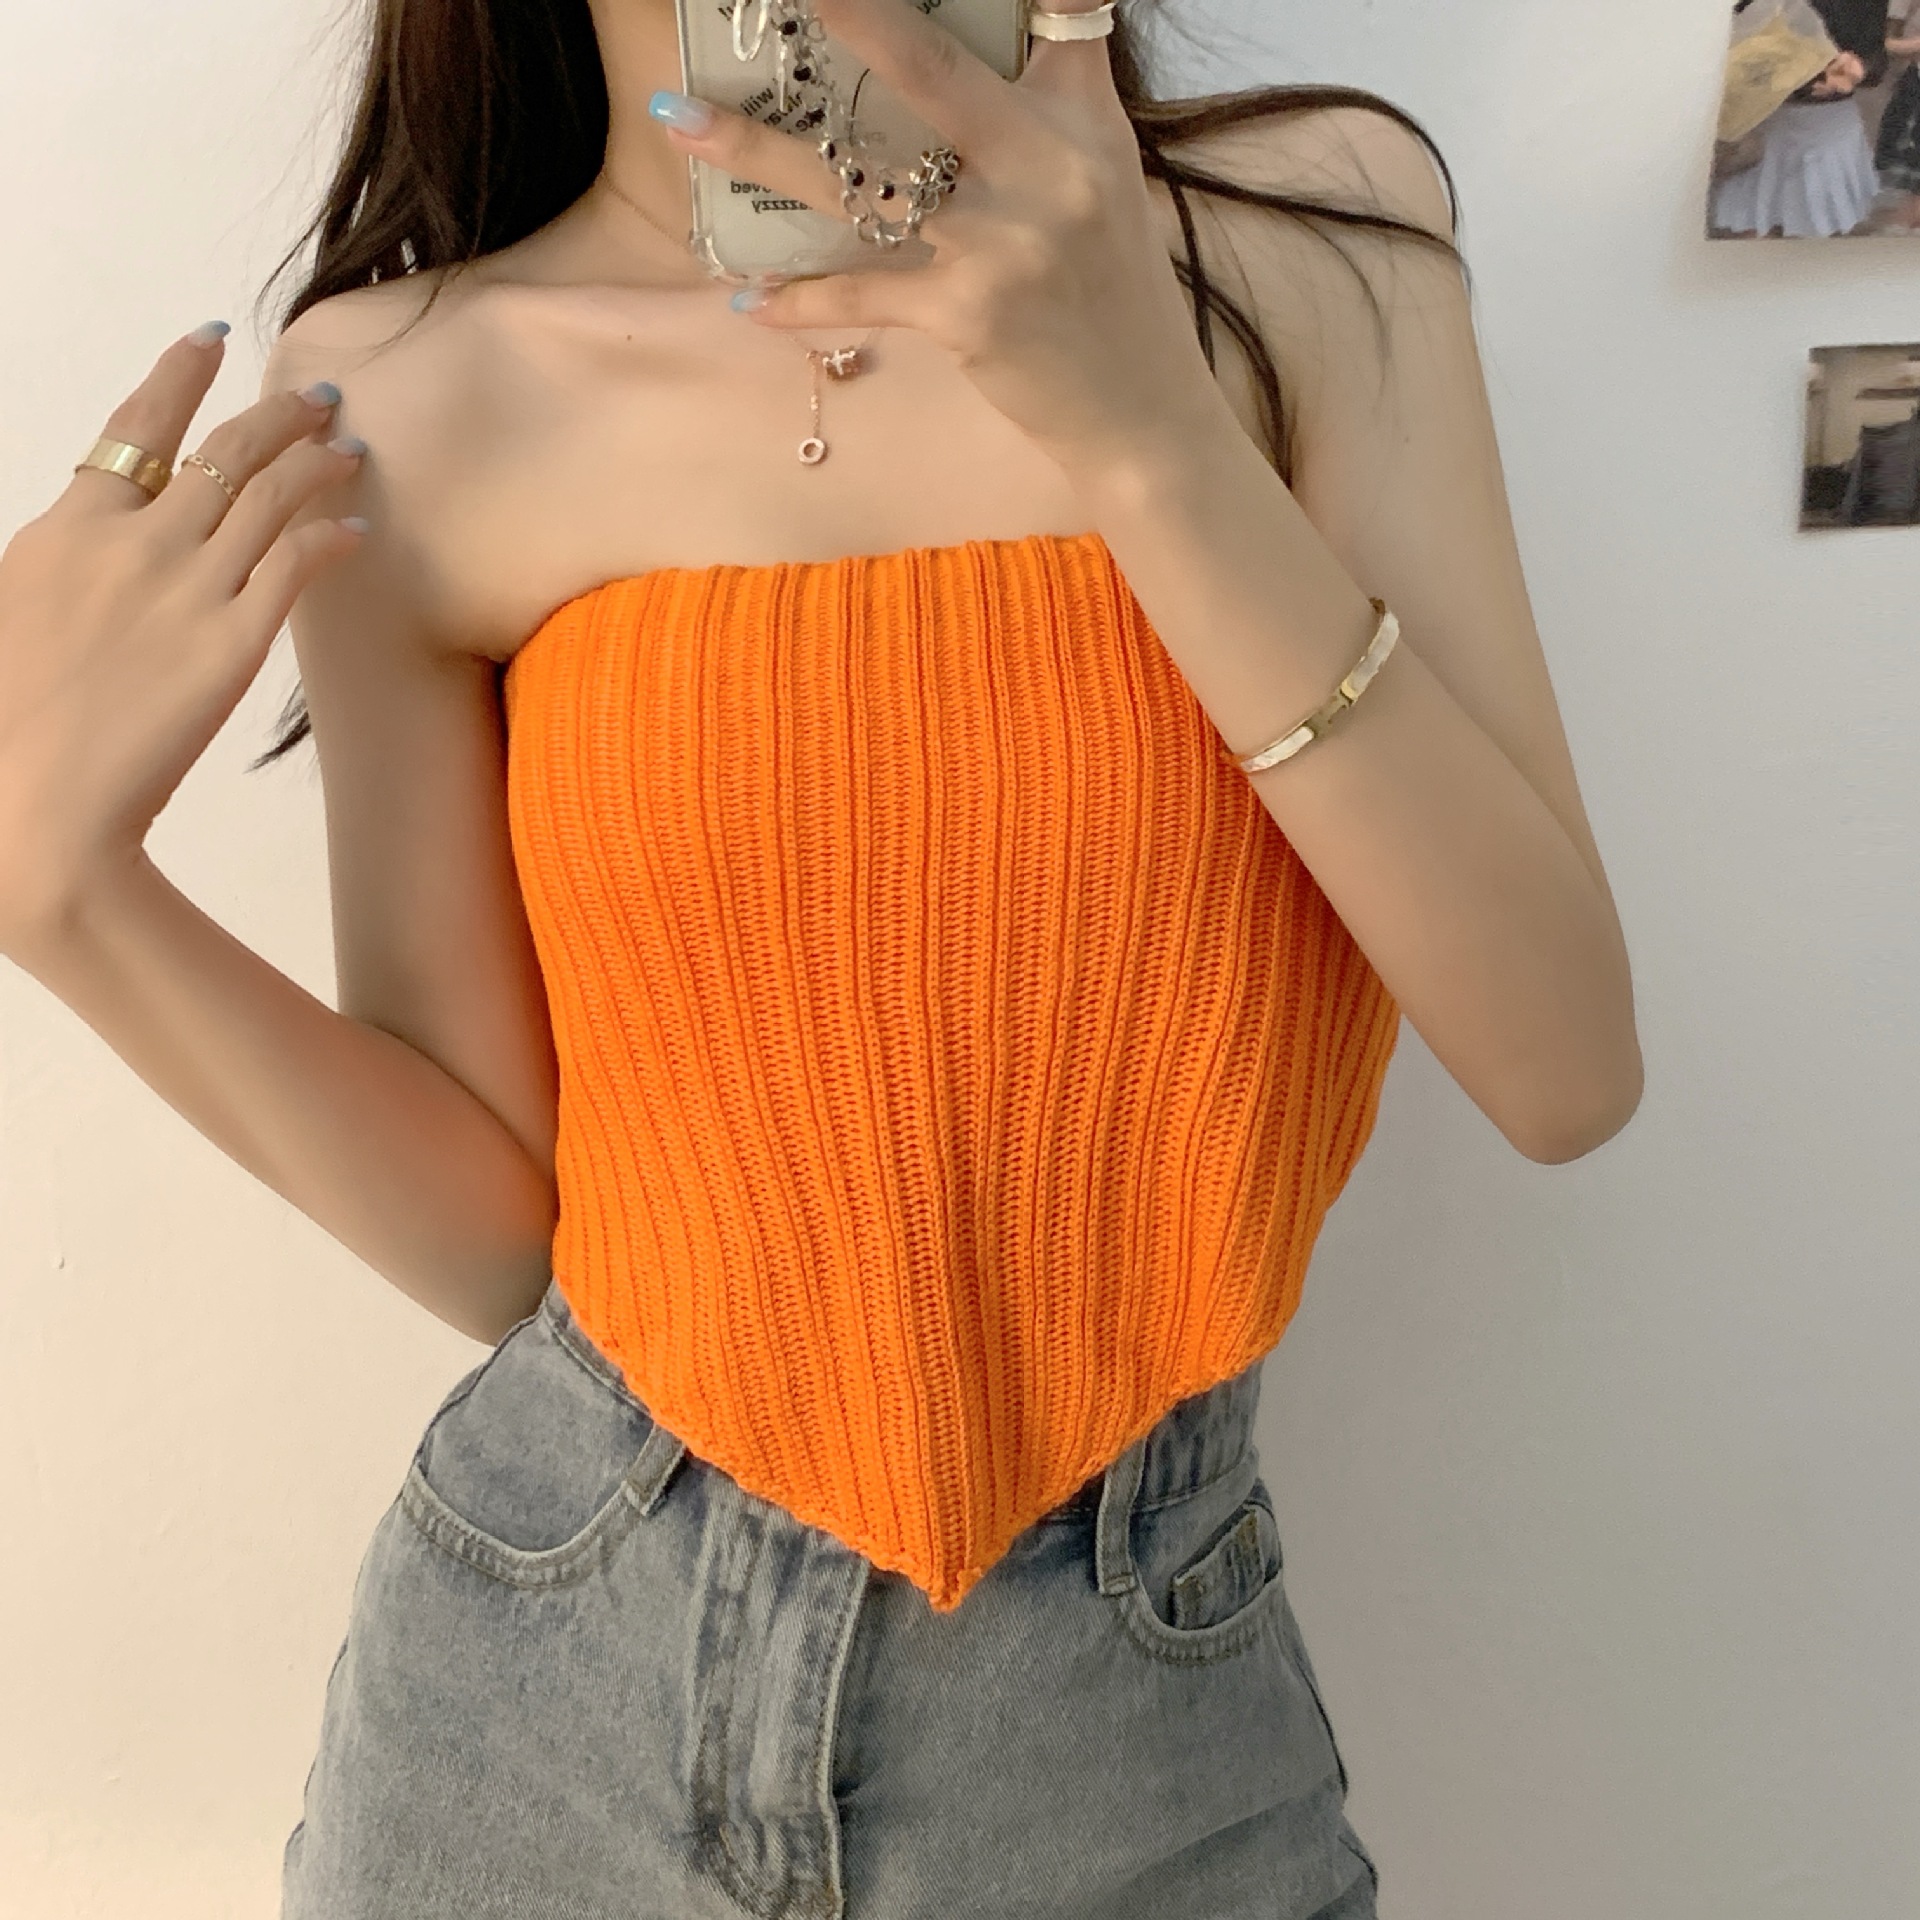 Korean version  summer pure lust style hot girl slim sexy tube top short lace-up vest design top for women